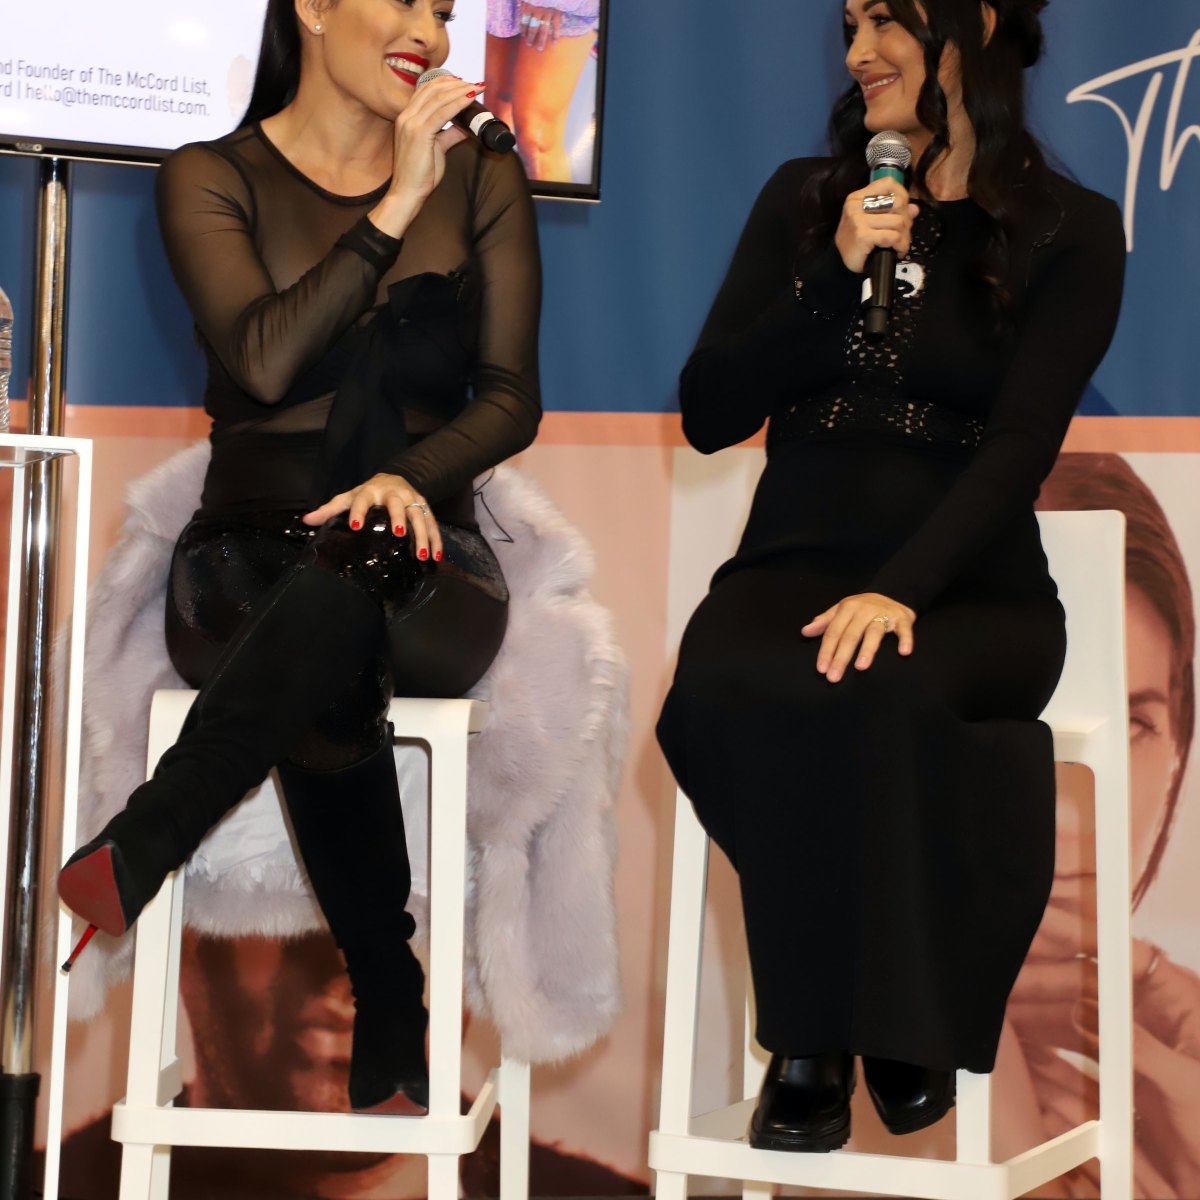 Nikki and Brie Bella flaunt their growing baby bumps at WWD Magic Las Vegas